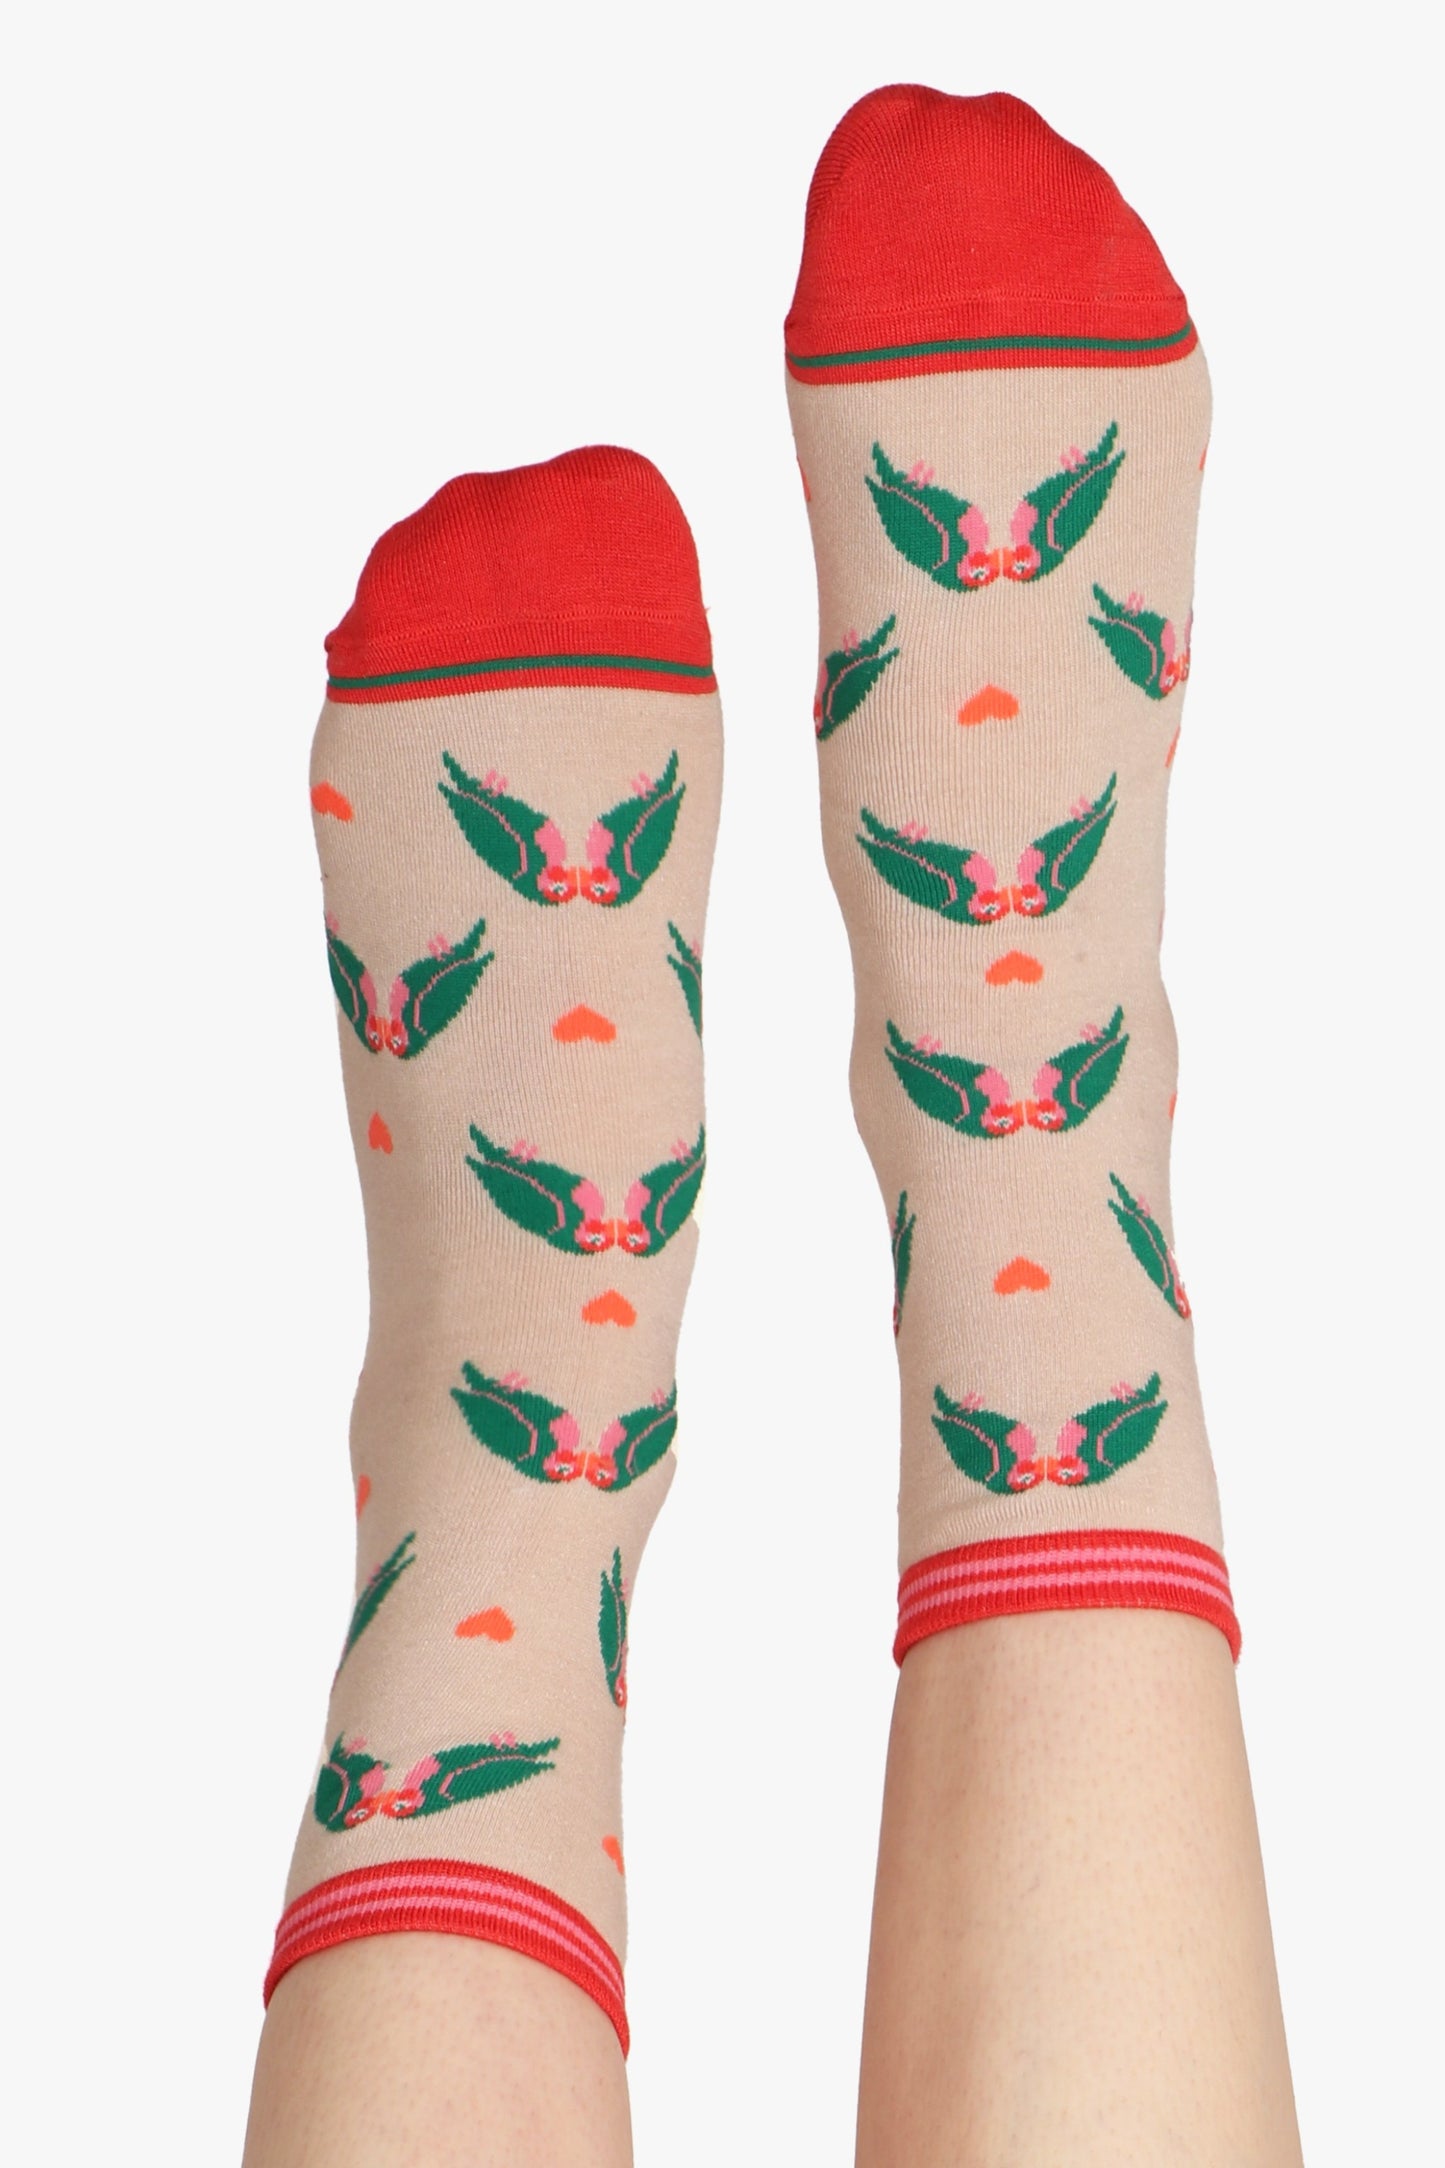 Ladies feet in air wearing lovebird print socks. Cuff and toe details can be seen